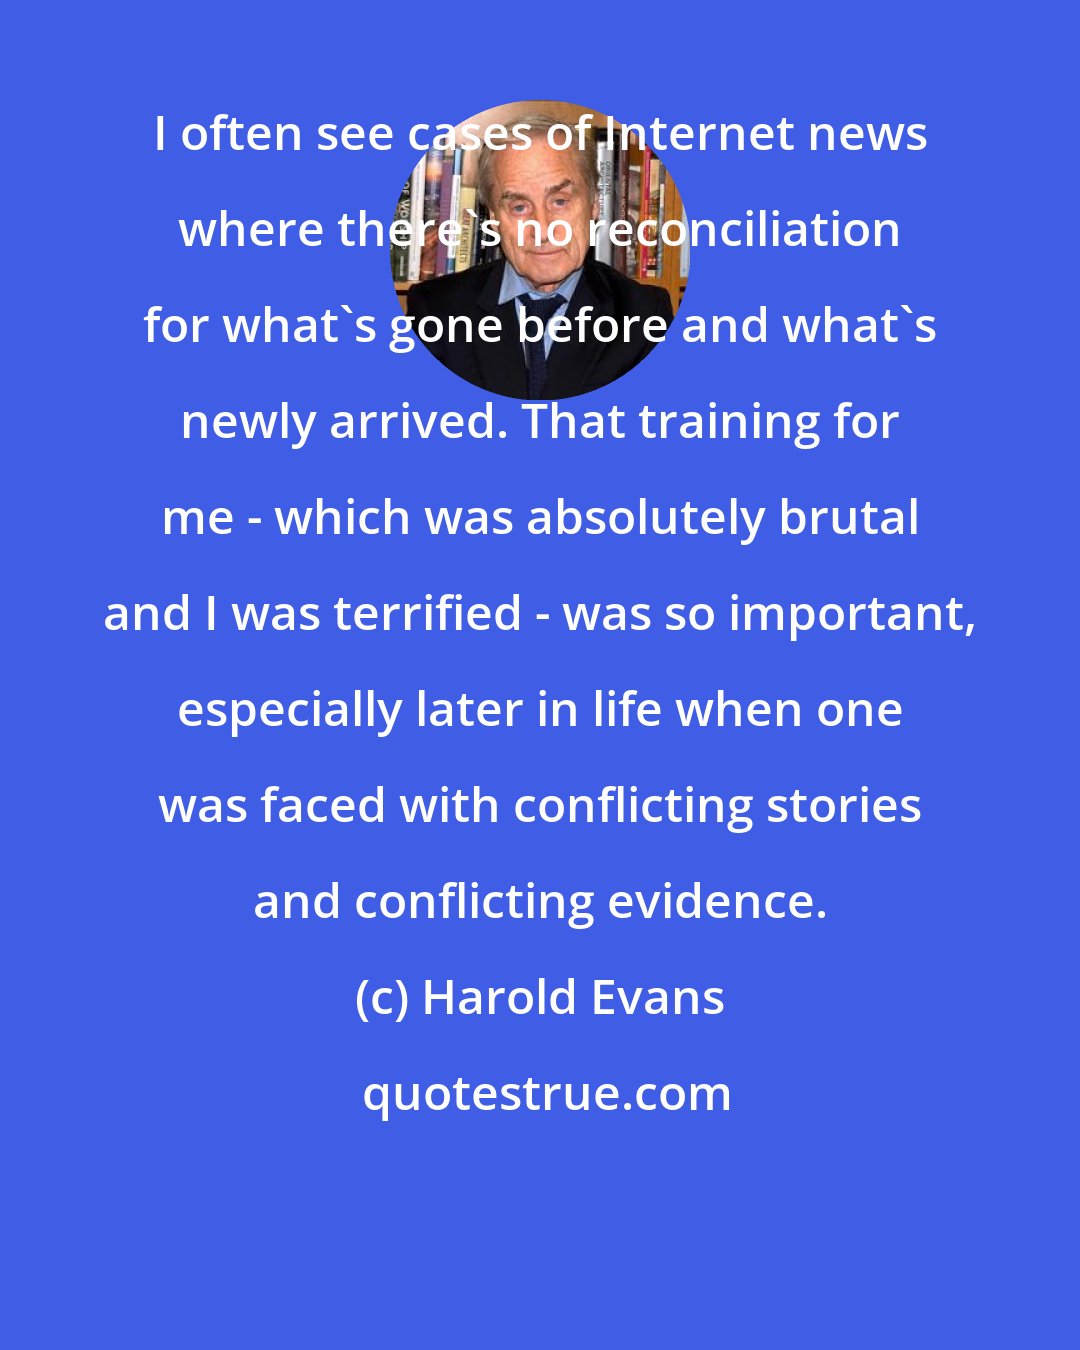 Harold Evans: I often see cases of Internet news where there's no reconciliation for what's gone before and what's newly arrived. That training for me - which was absolutely brutal and I was terrified - was so important, especially later in life when one was faced with conflicting stories and conflicting evidence.